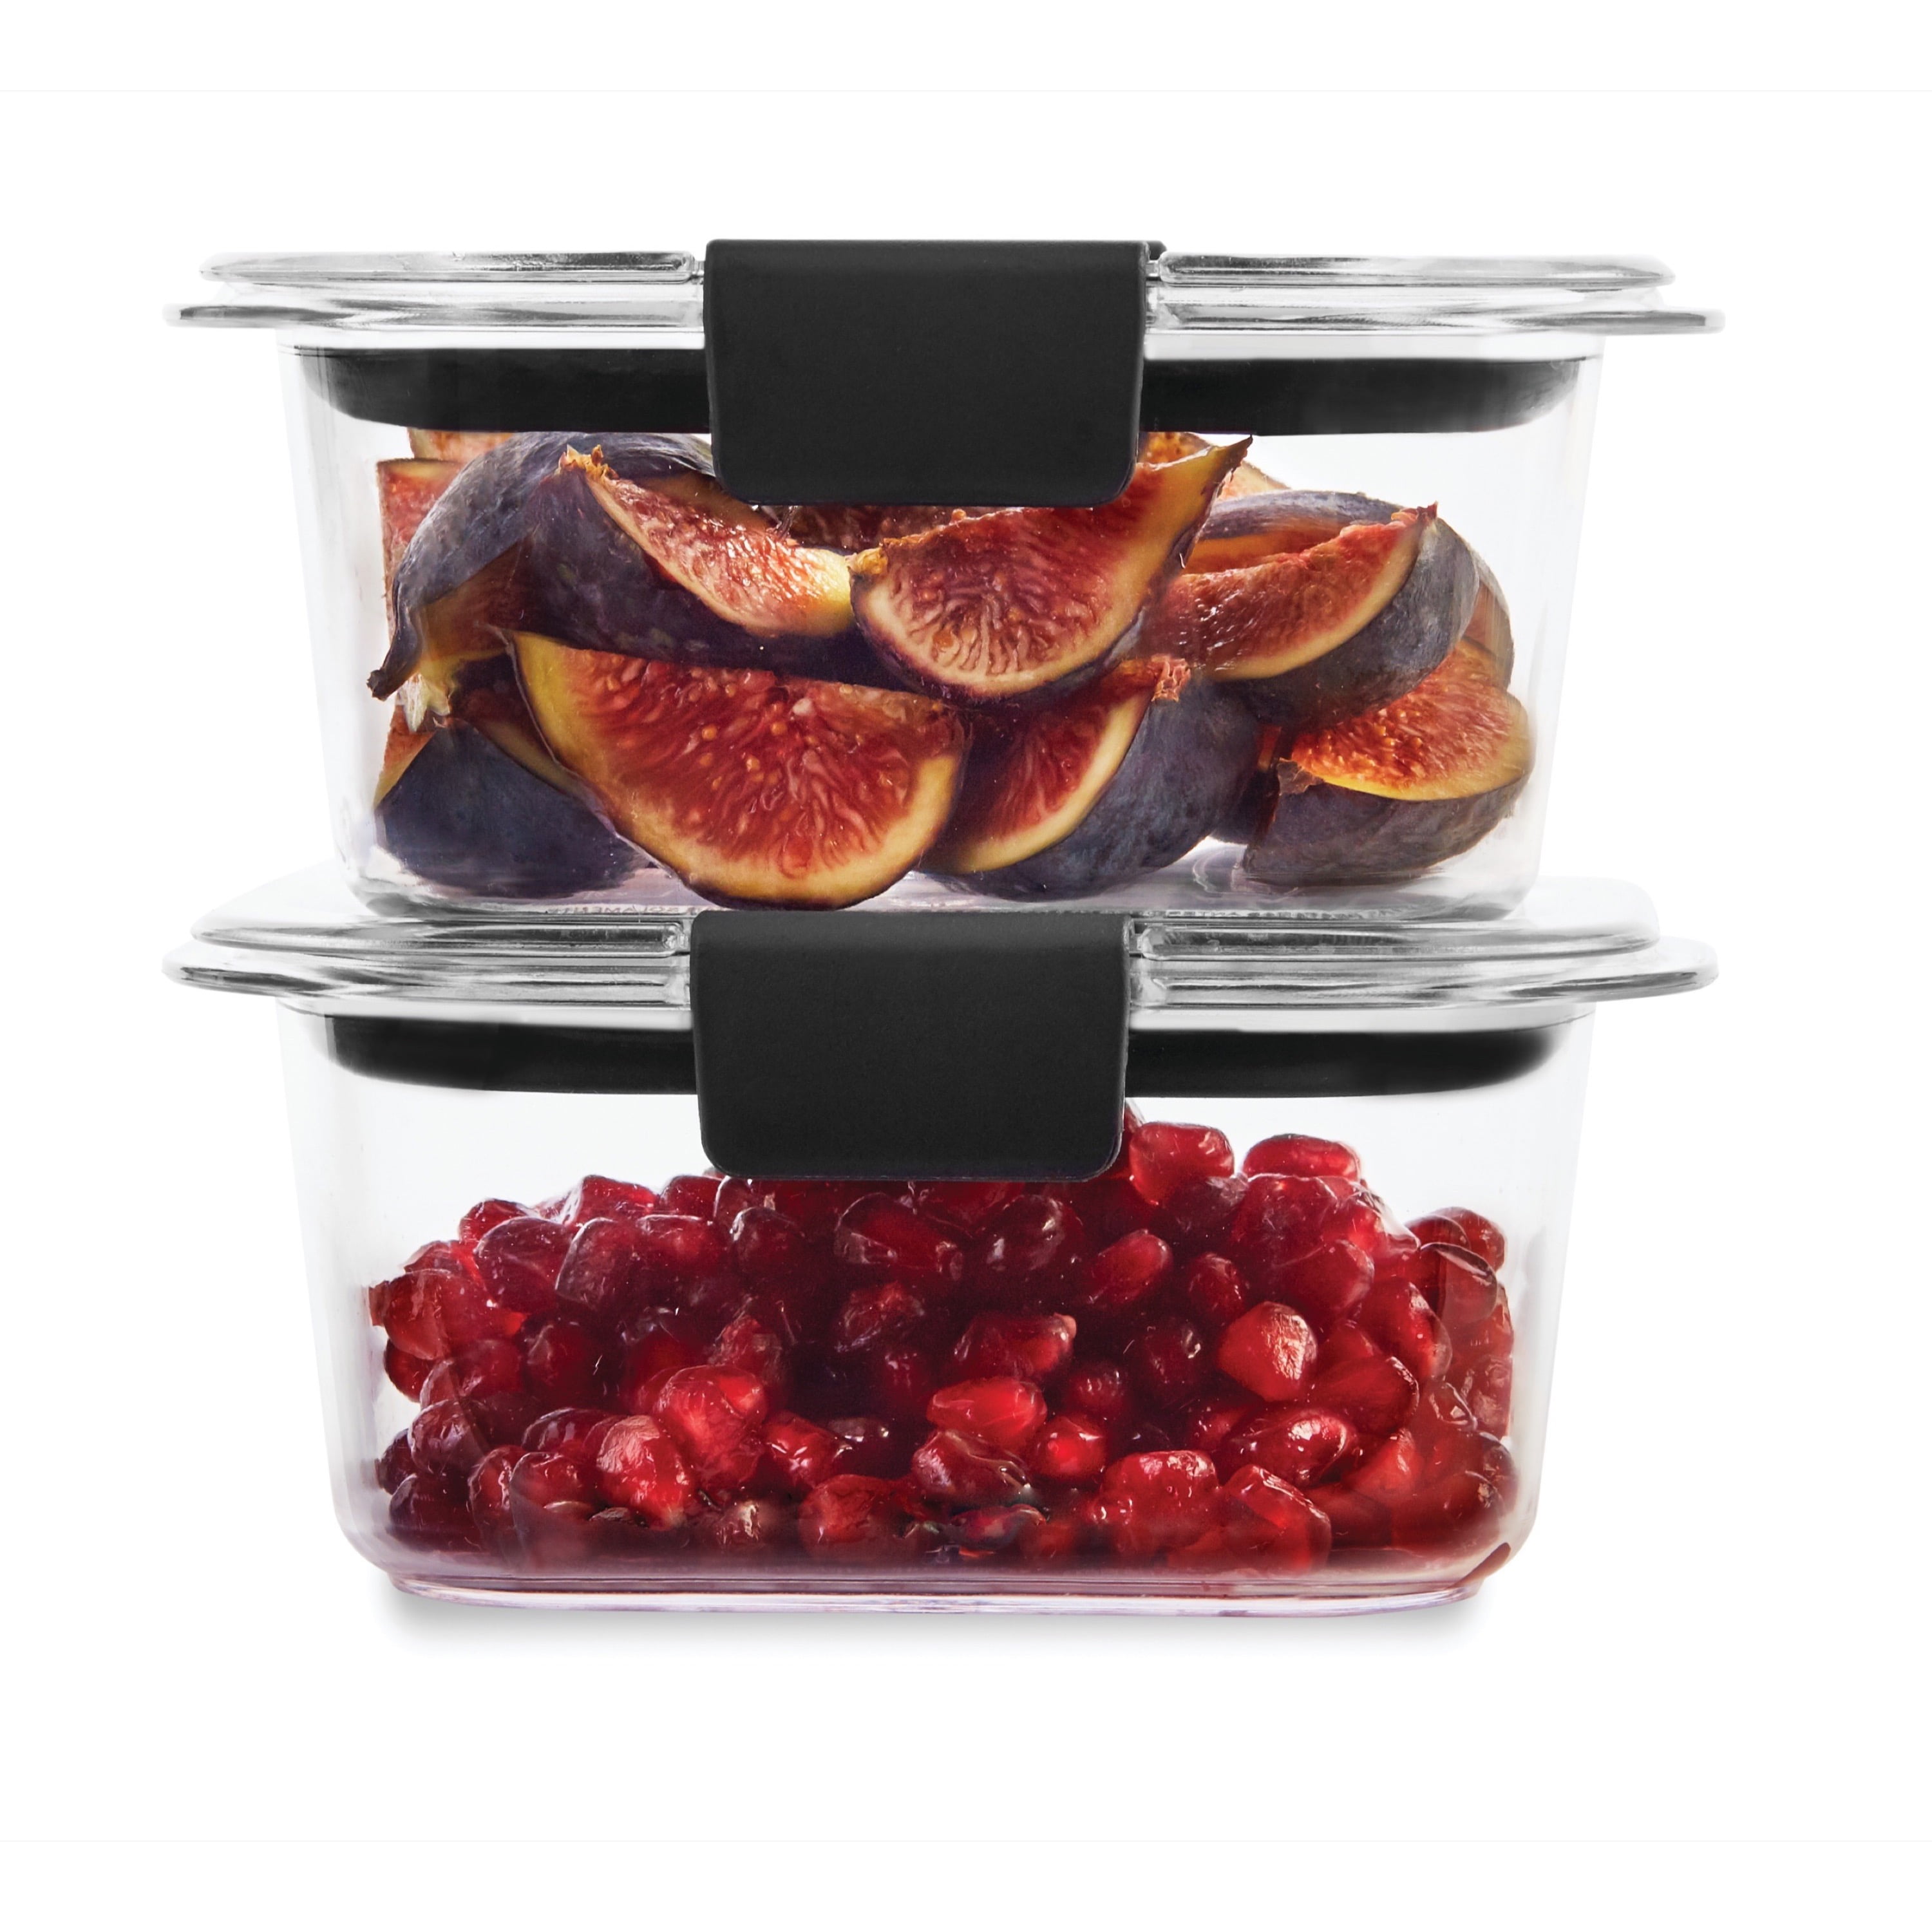 Rubbermaid® Brilliance Glass Food Storage Containers, 2 pk - Foods Co.